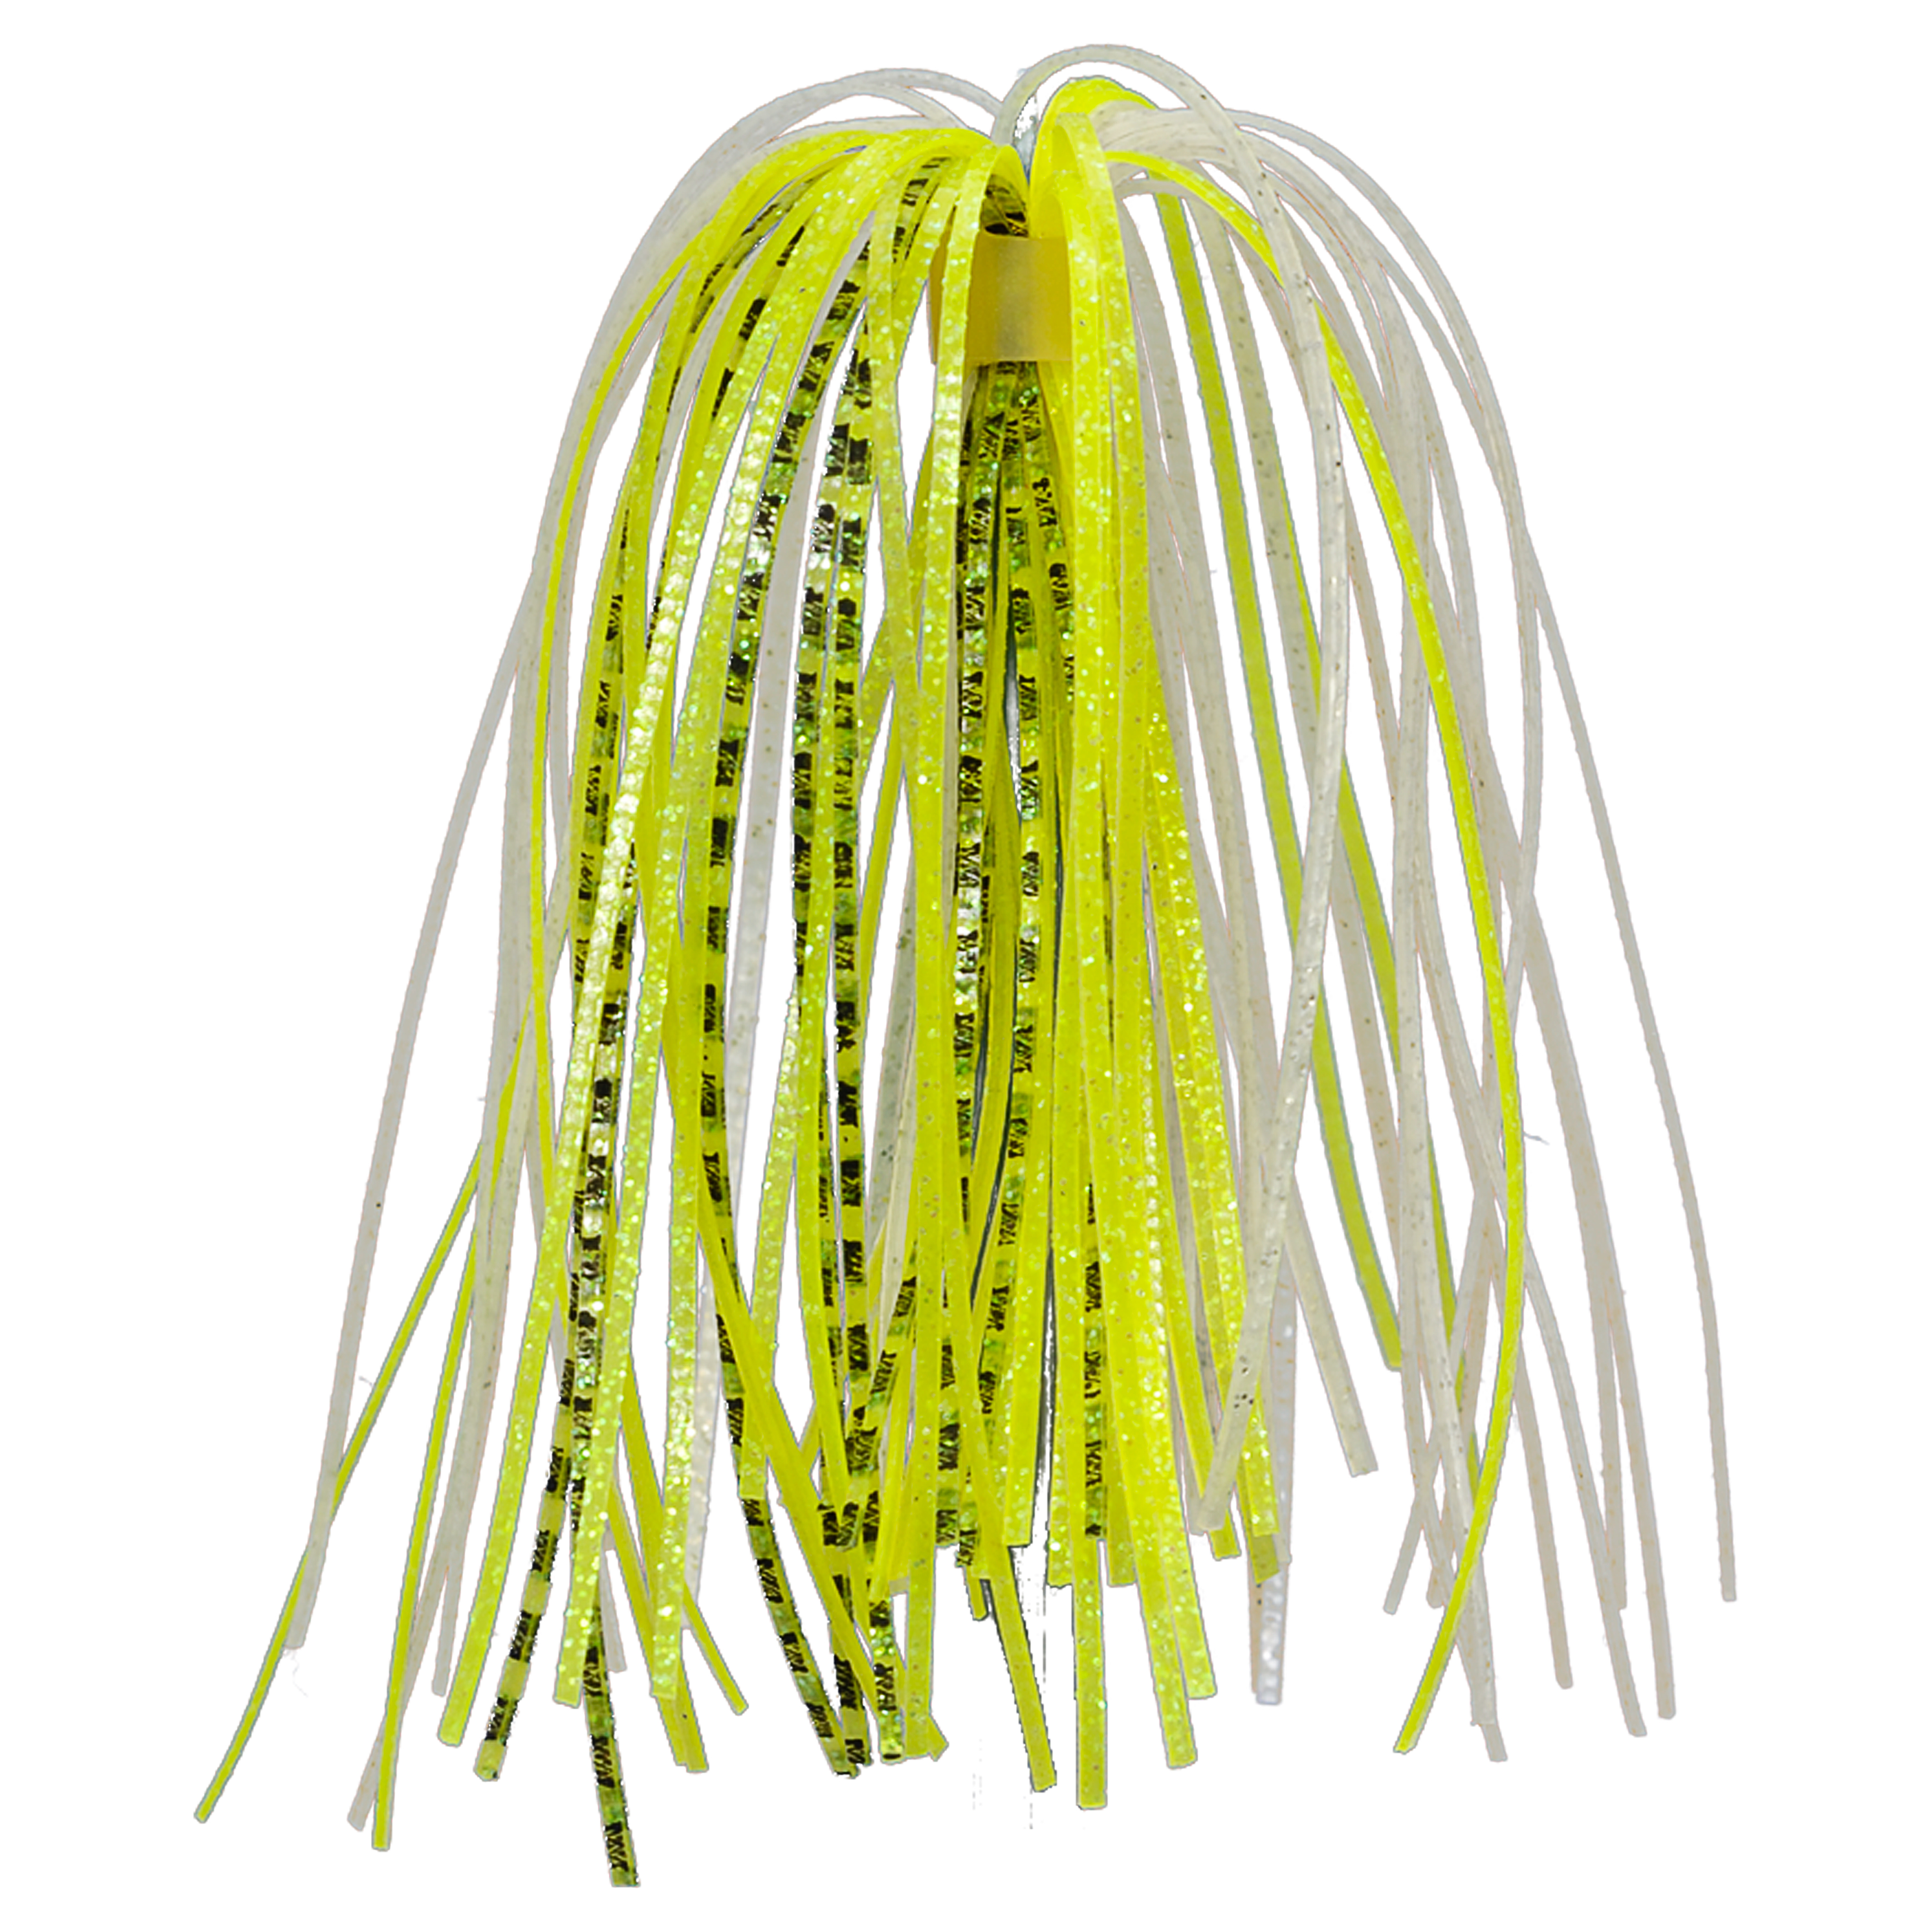 8 Bundles 50 Strands Silicone Skirts Jigs Replacement Skirts DIY Fly Tying Fishing Lure Accessories Buzzbaits Spinnerbaits Color All Yellow